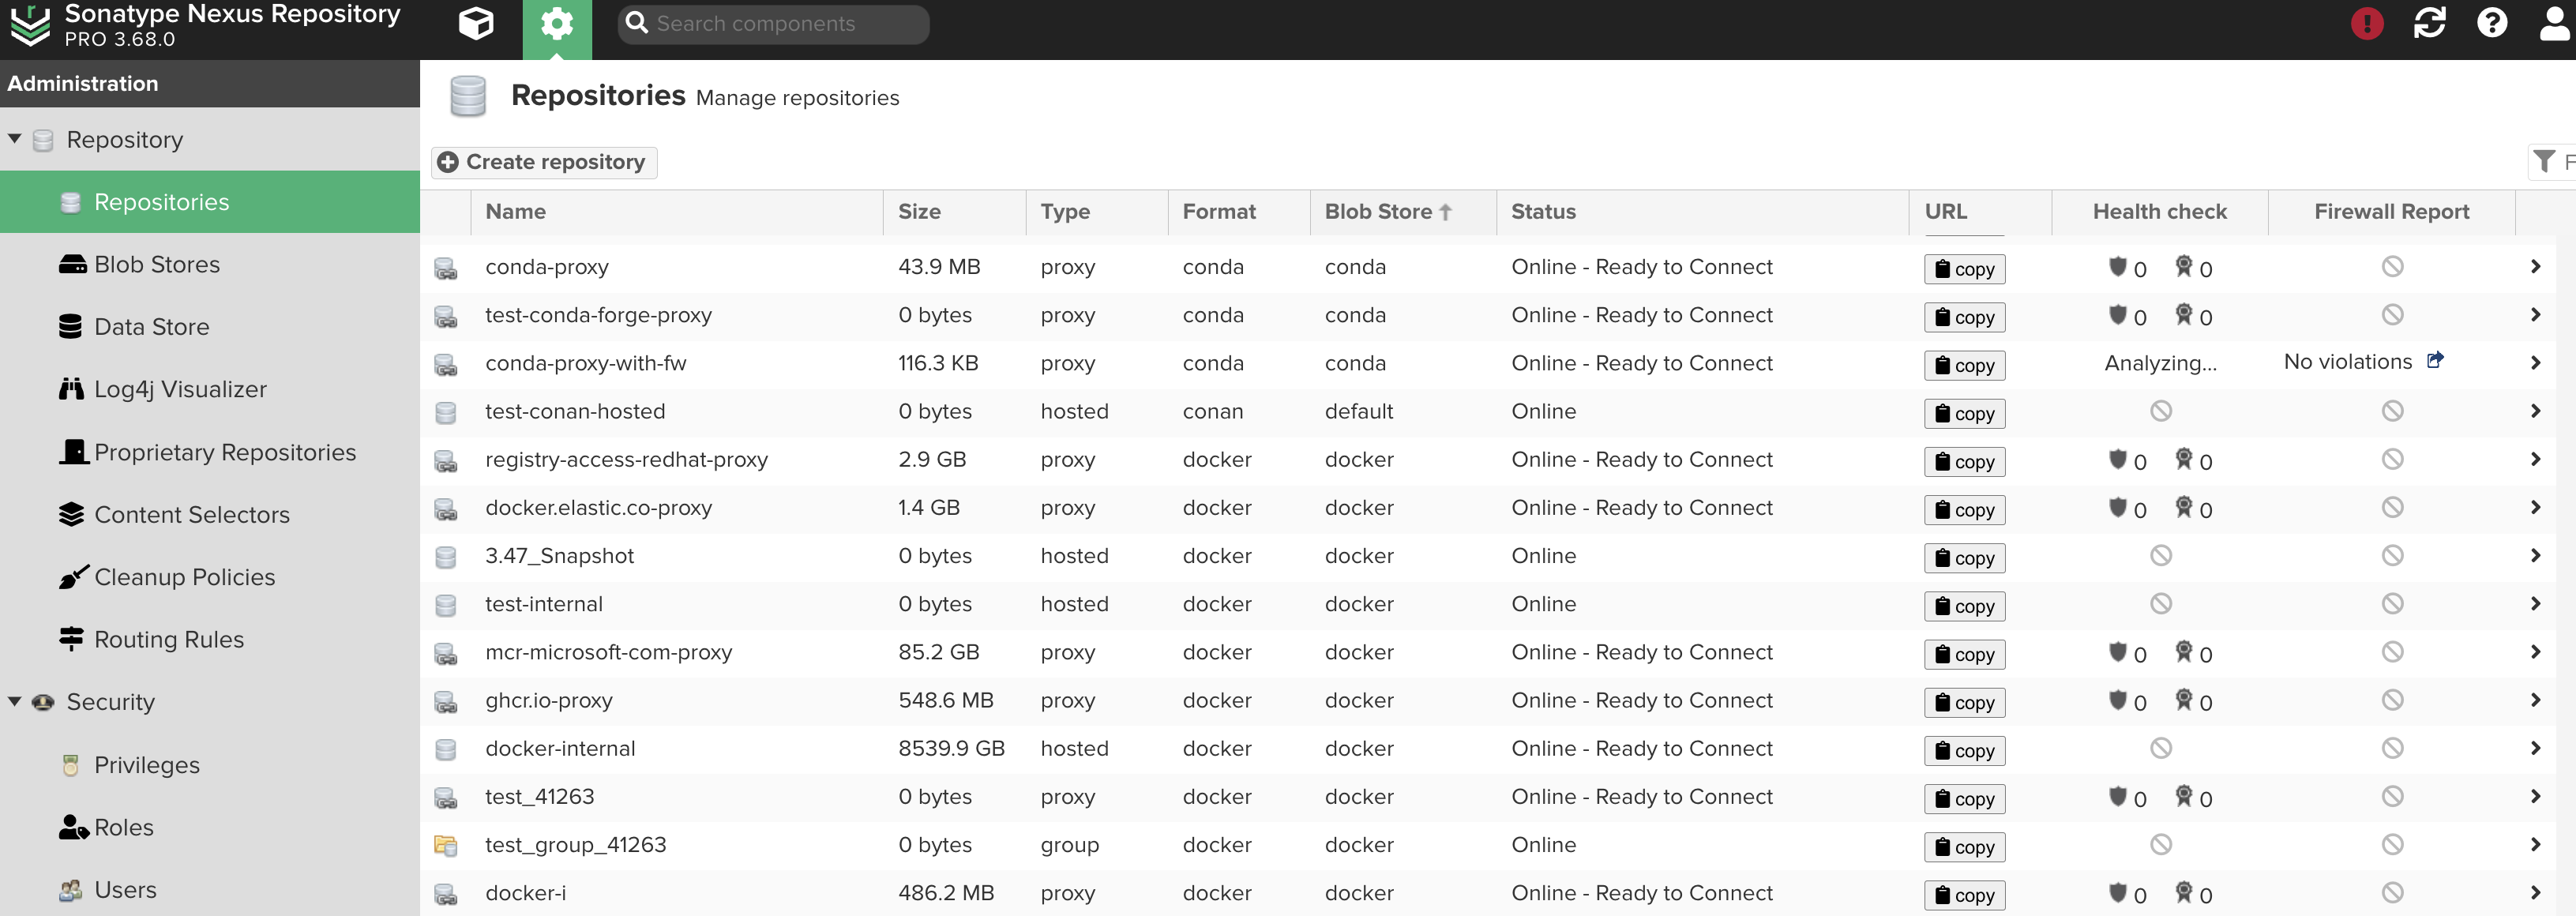 View for managing repositories includes repo size and Firewall summary